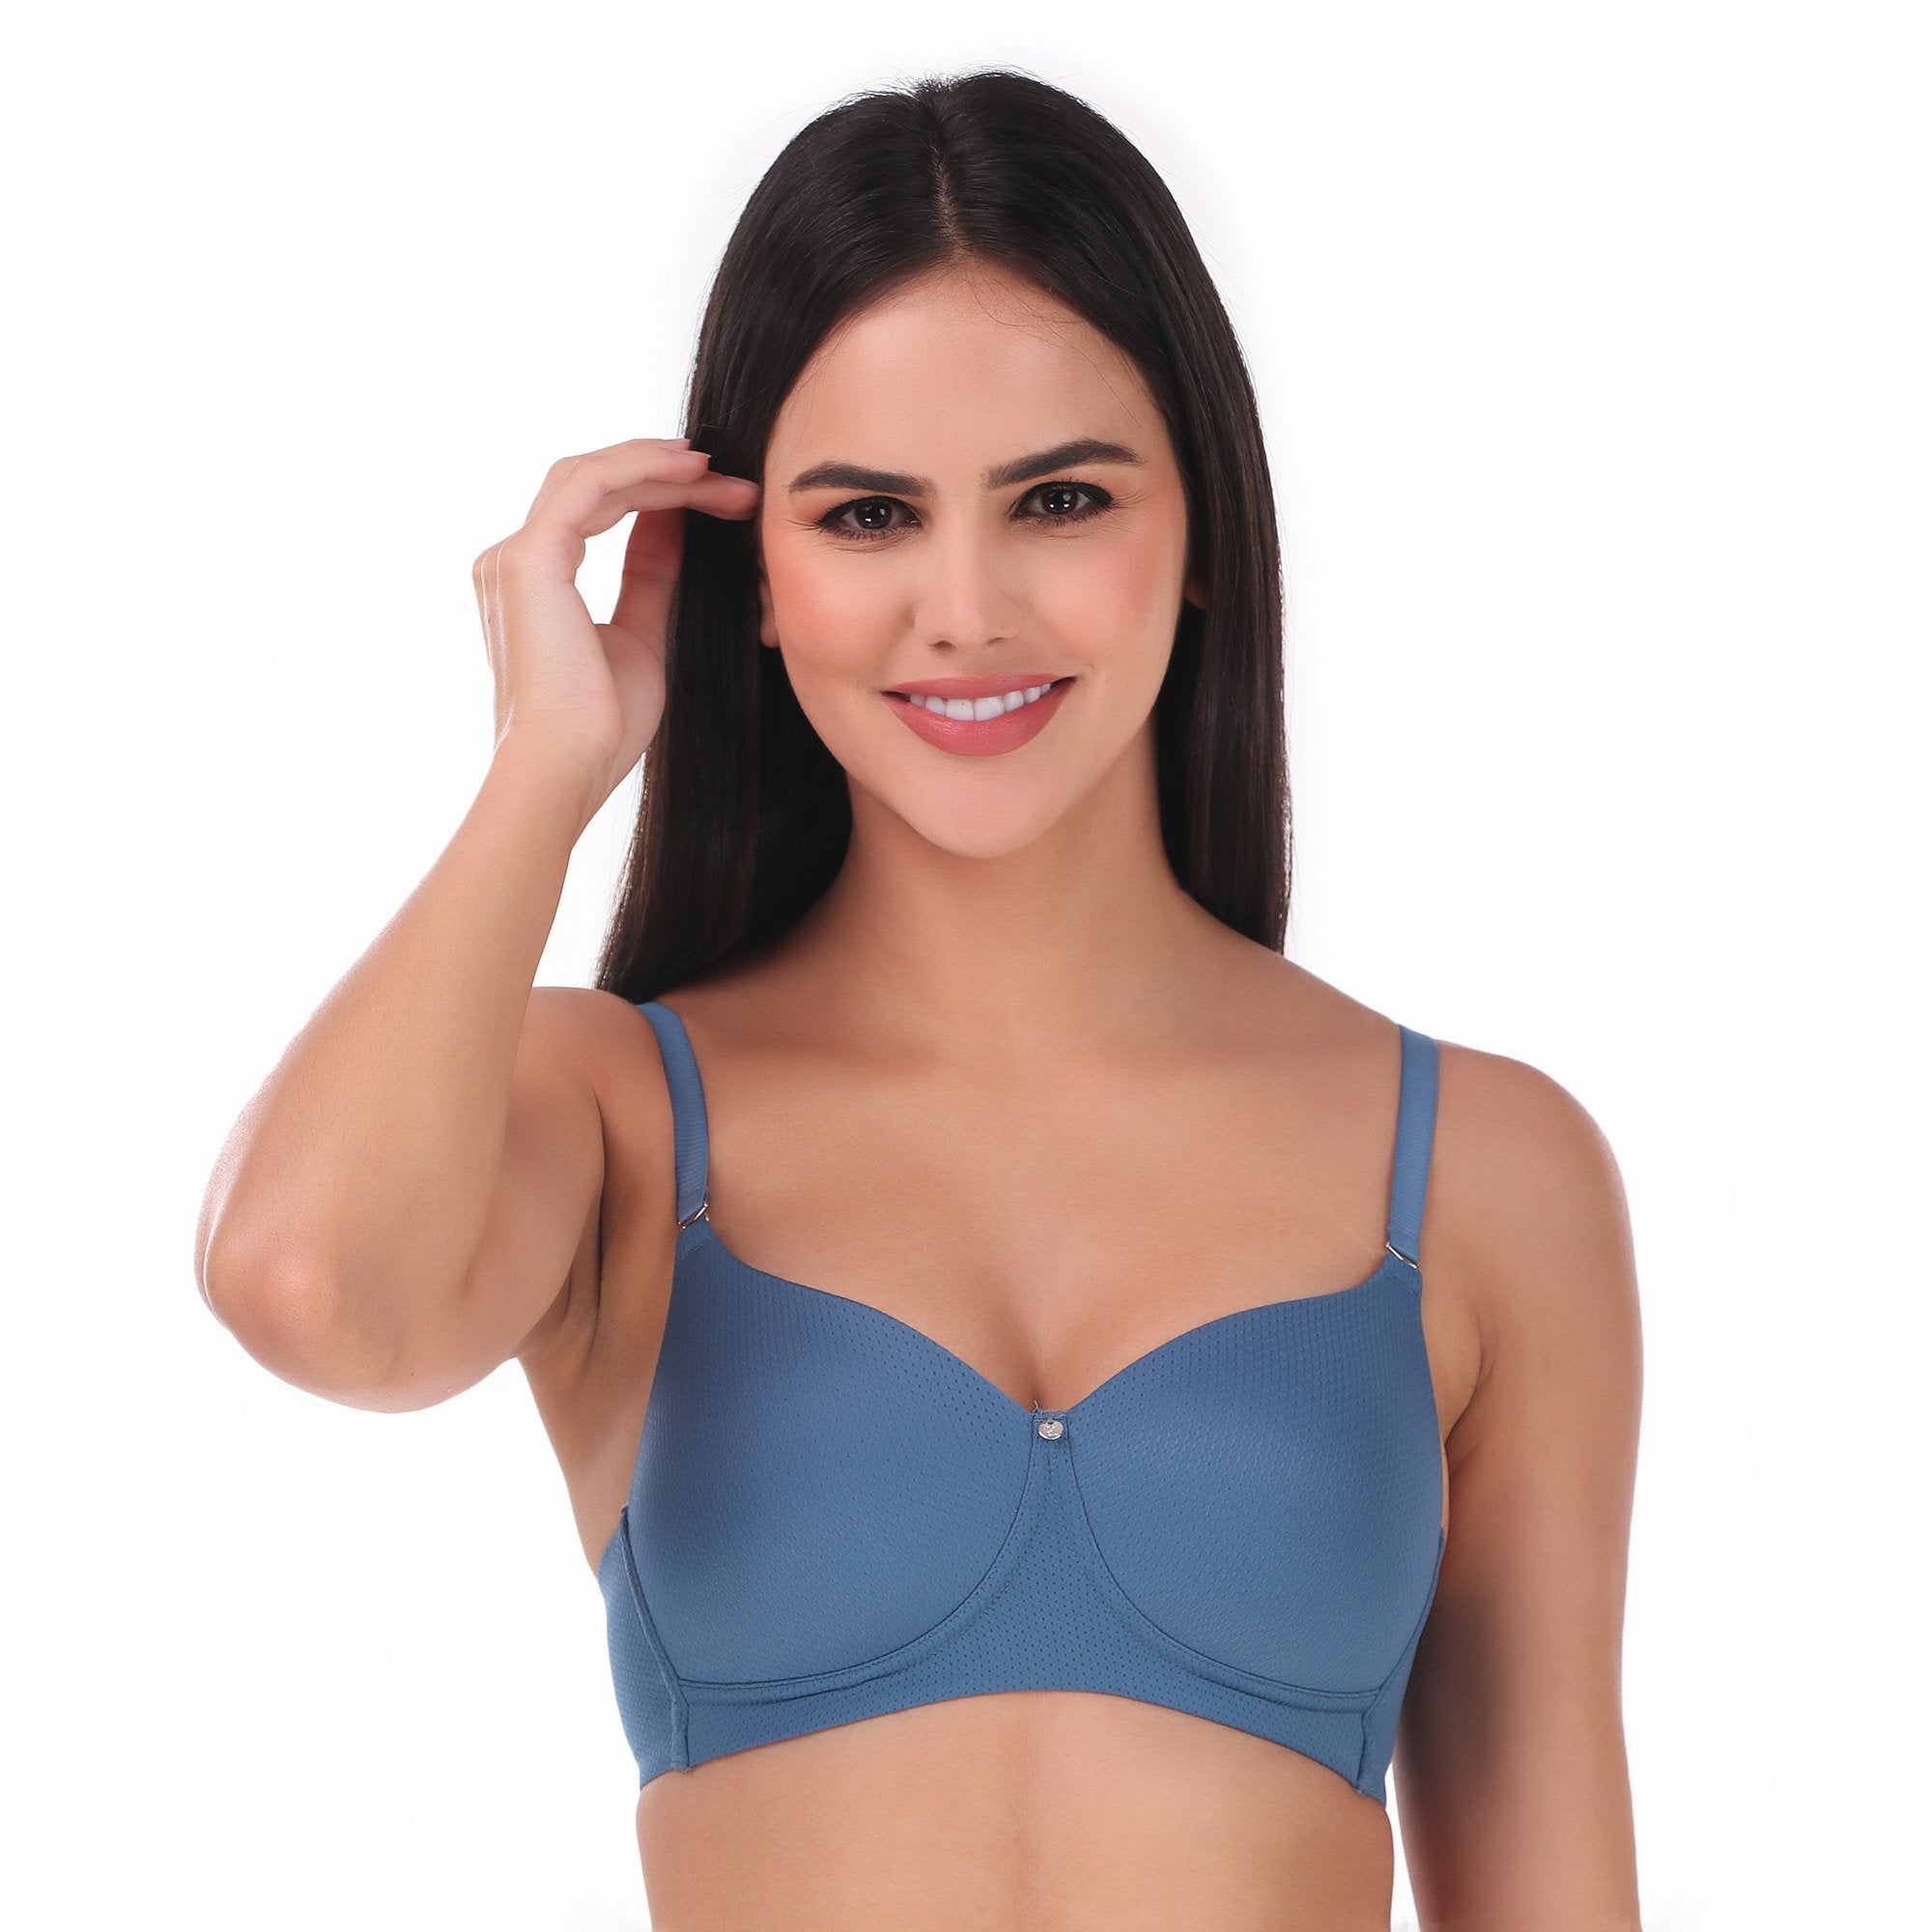 Amante Cotton 38C Push Up Bra in Valsad - Dealers, Manufacturers &  Suppliers - Justdial